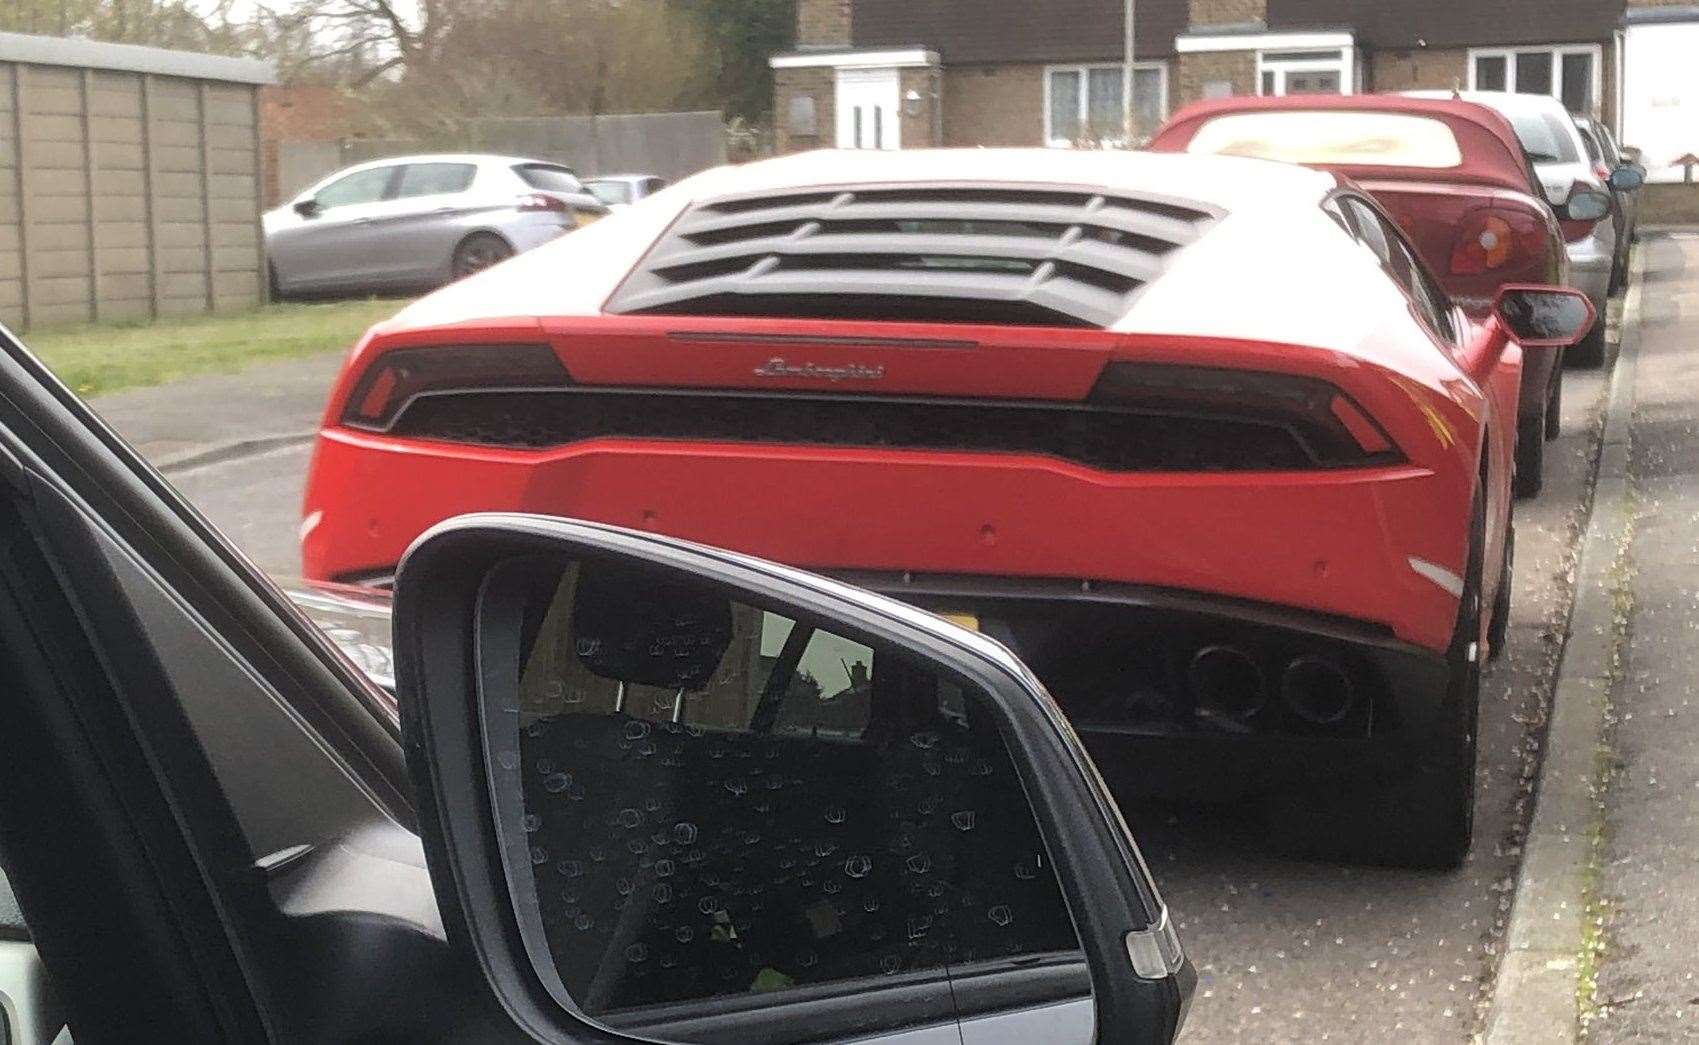 Officers pulled over the supercar on Tuesday